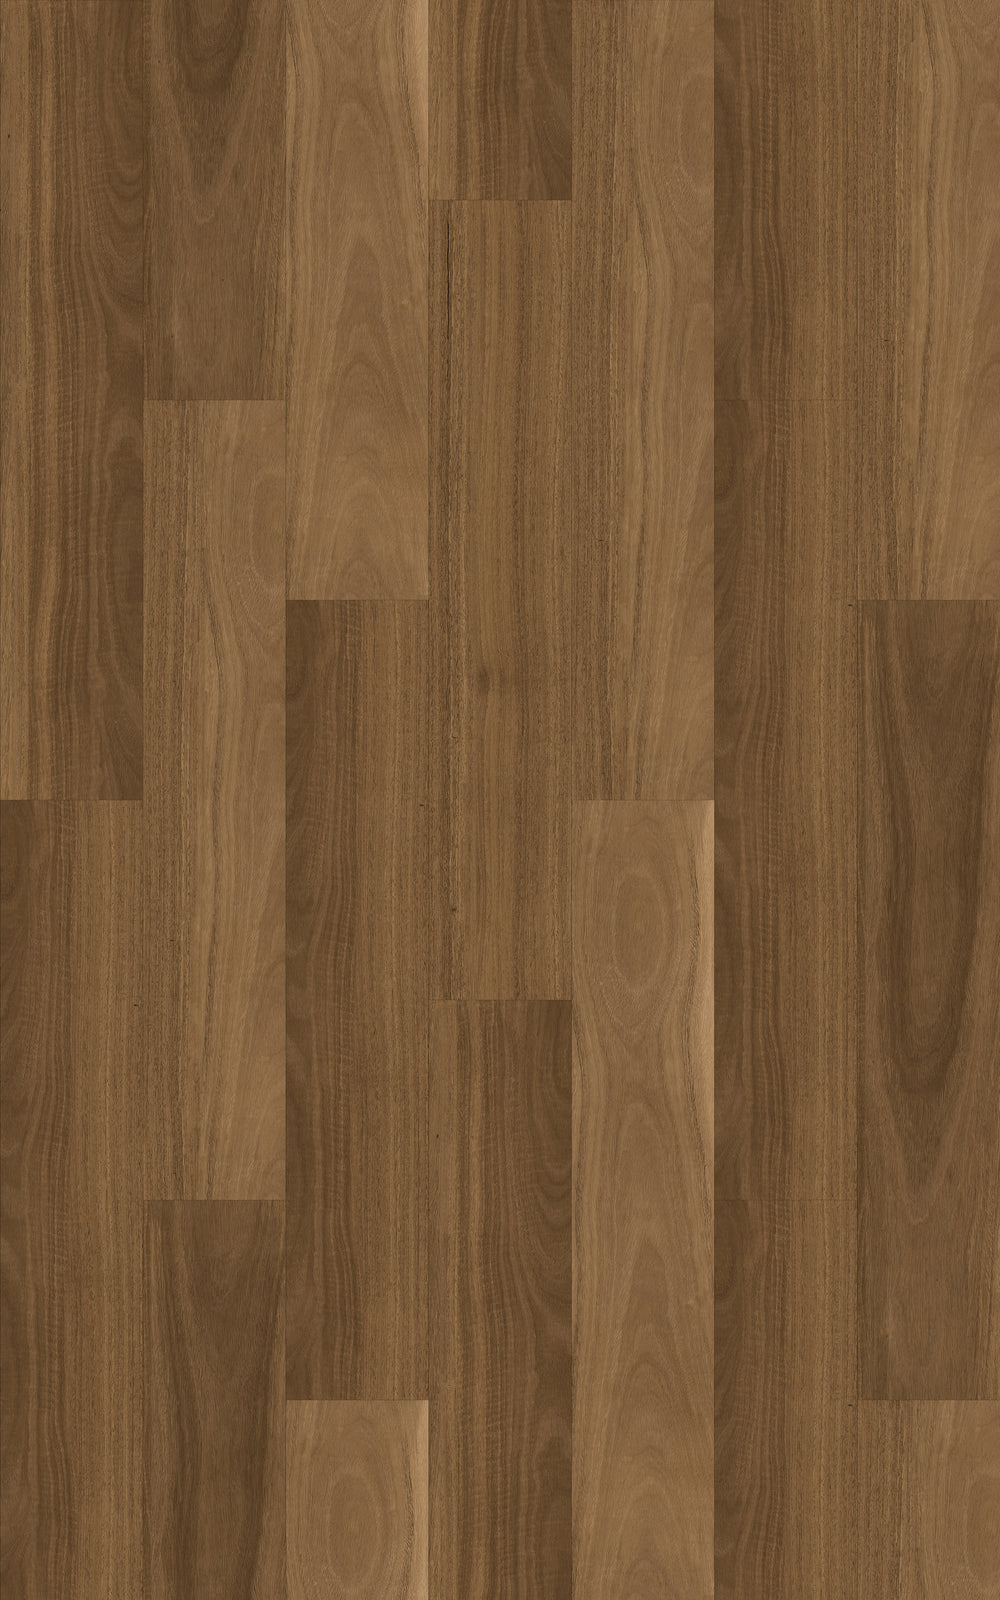 Kingswood Australis | Spotted Gum Traditional